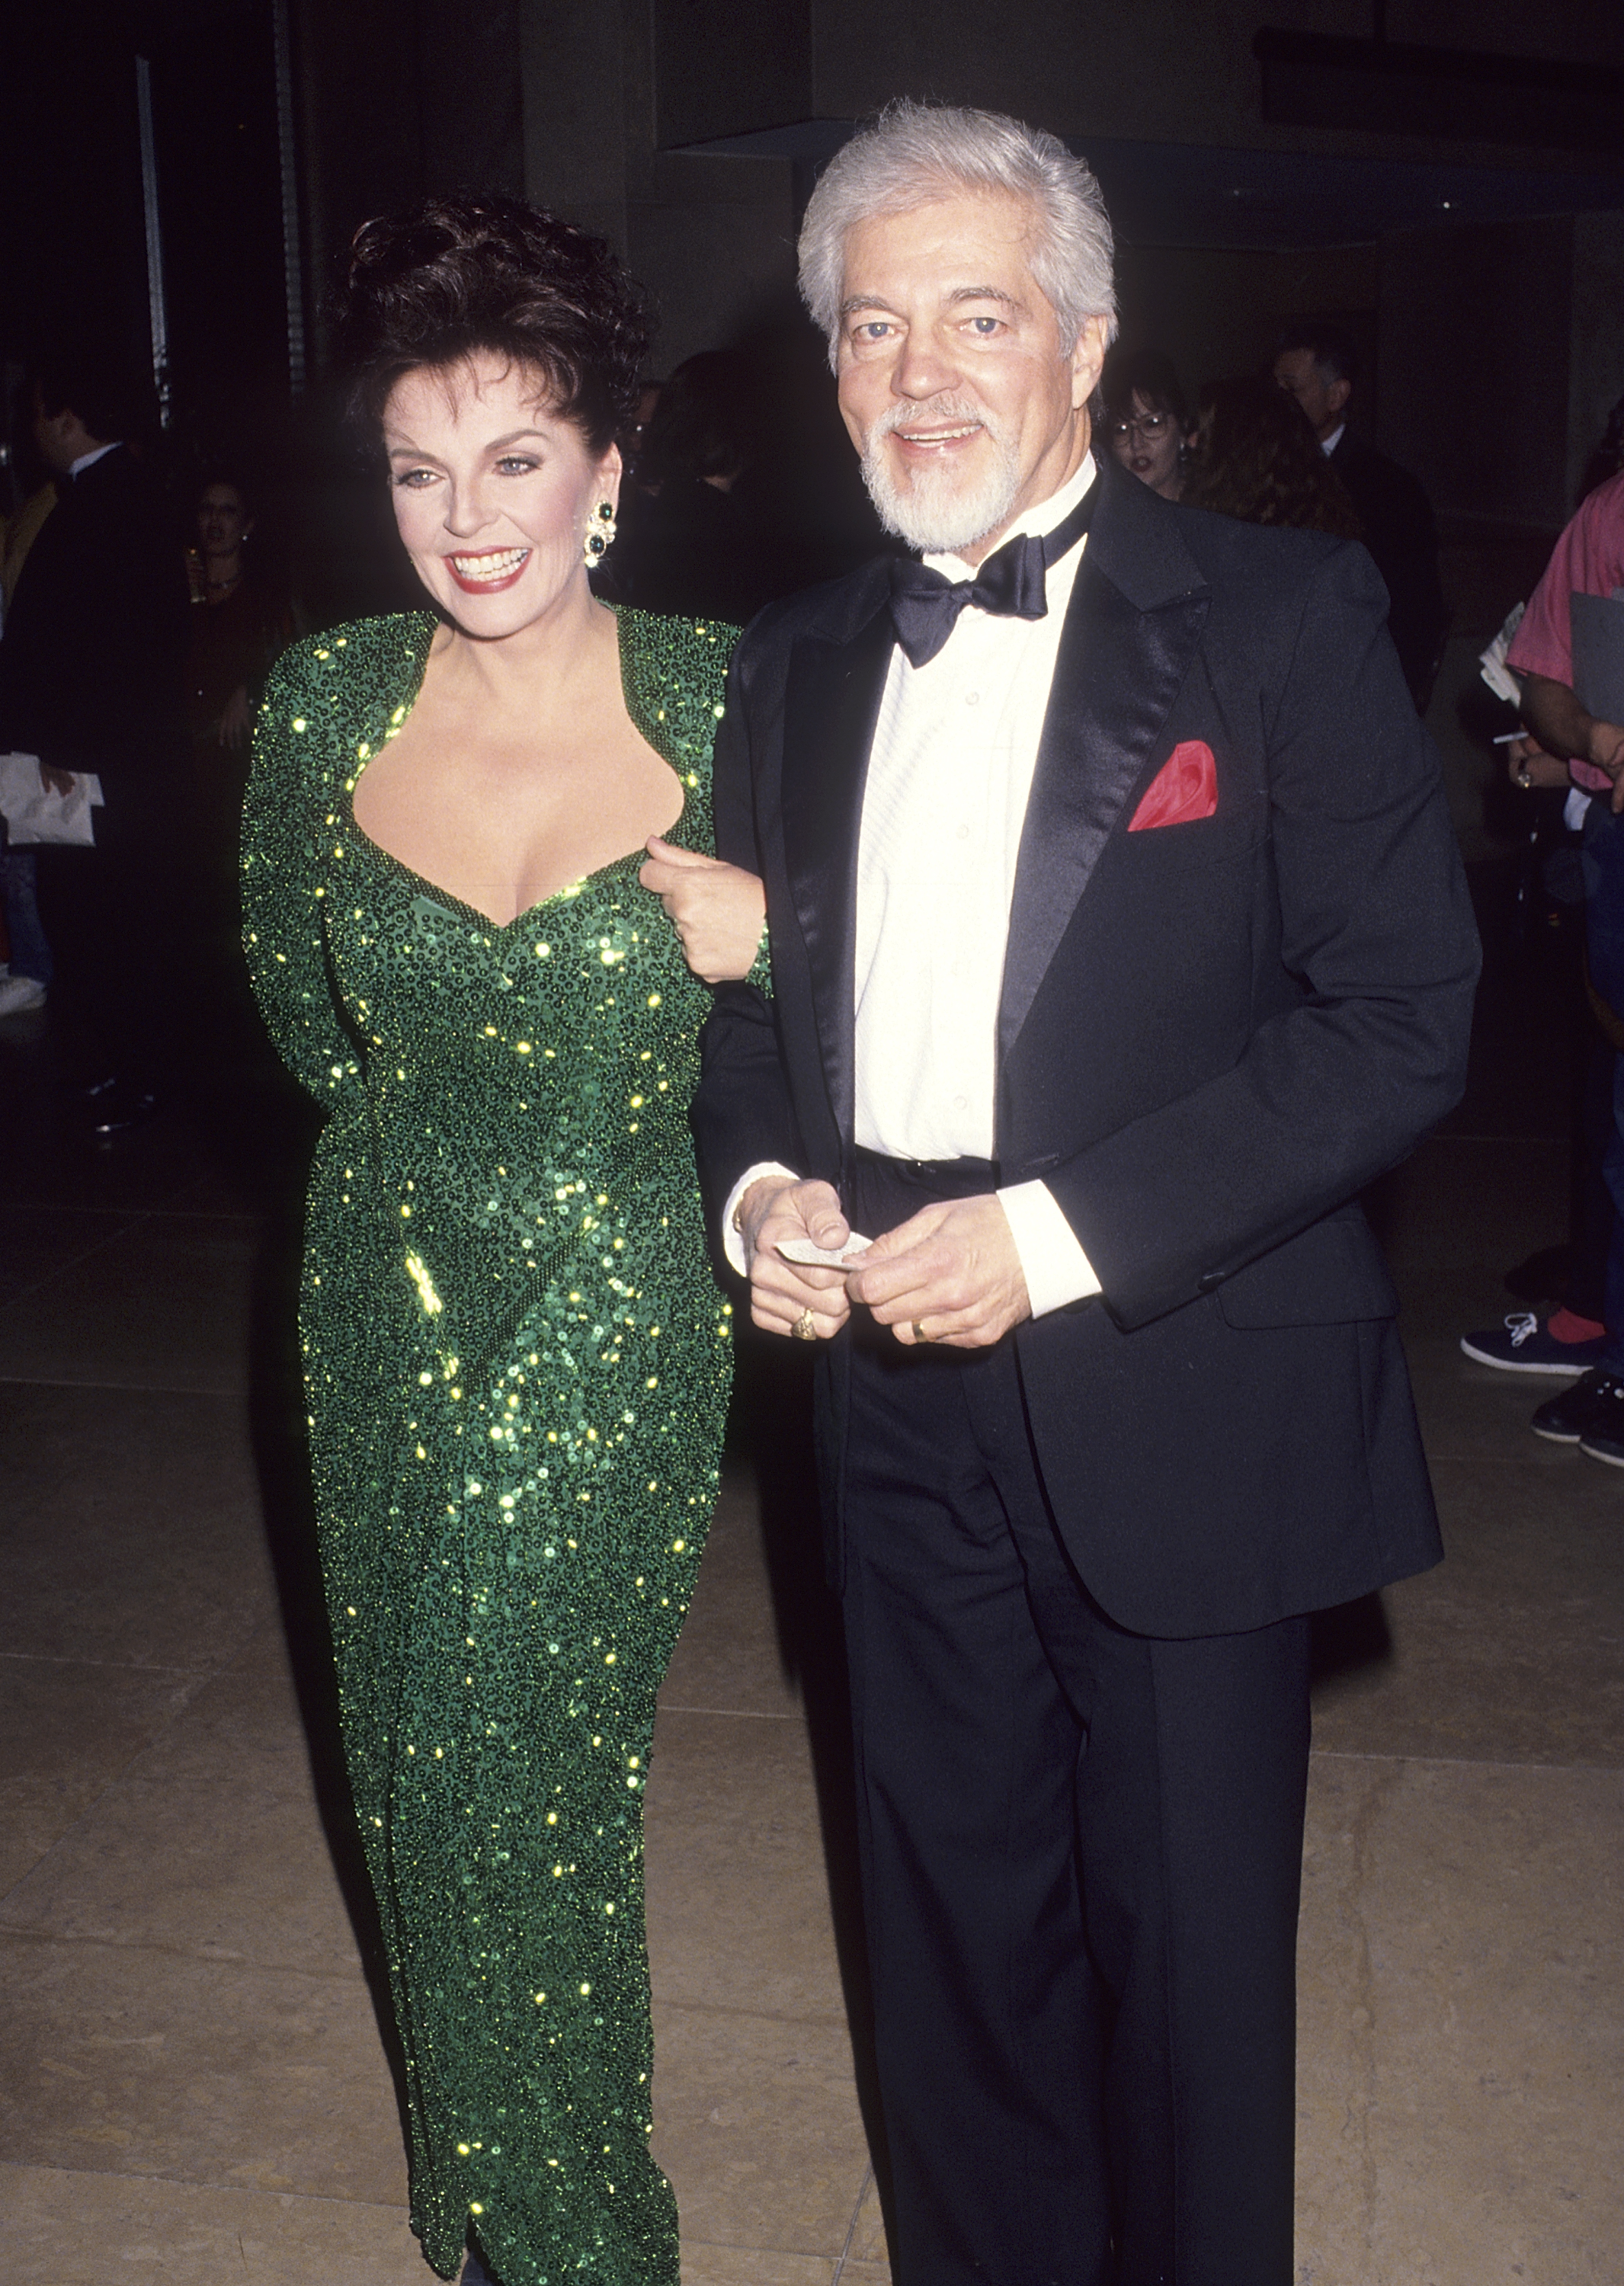 Susan Seaforth Hayes and her husband Bill Hayes at the Eighth Annual Soap Opera Digest Awards at the Beverly Hilton Hotel on January 10, 1992 in Beverly Hills, California | Source: Getty Images